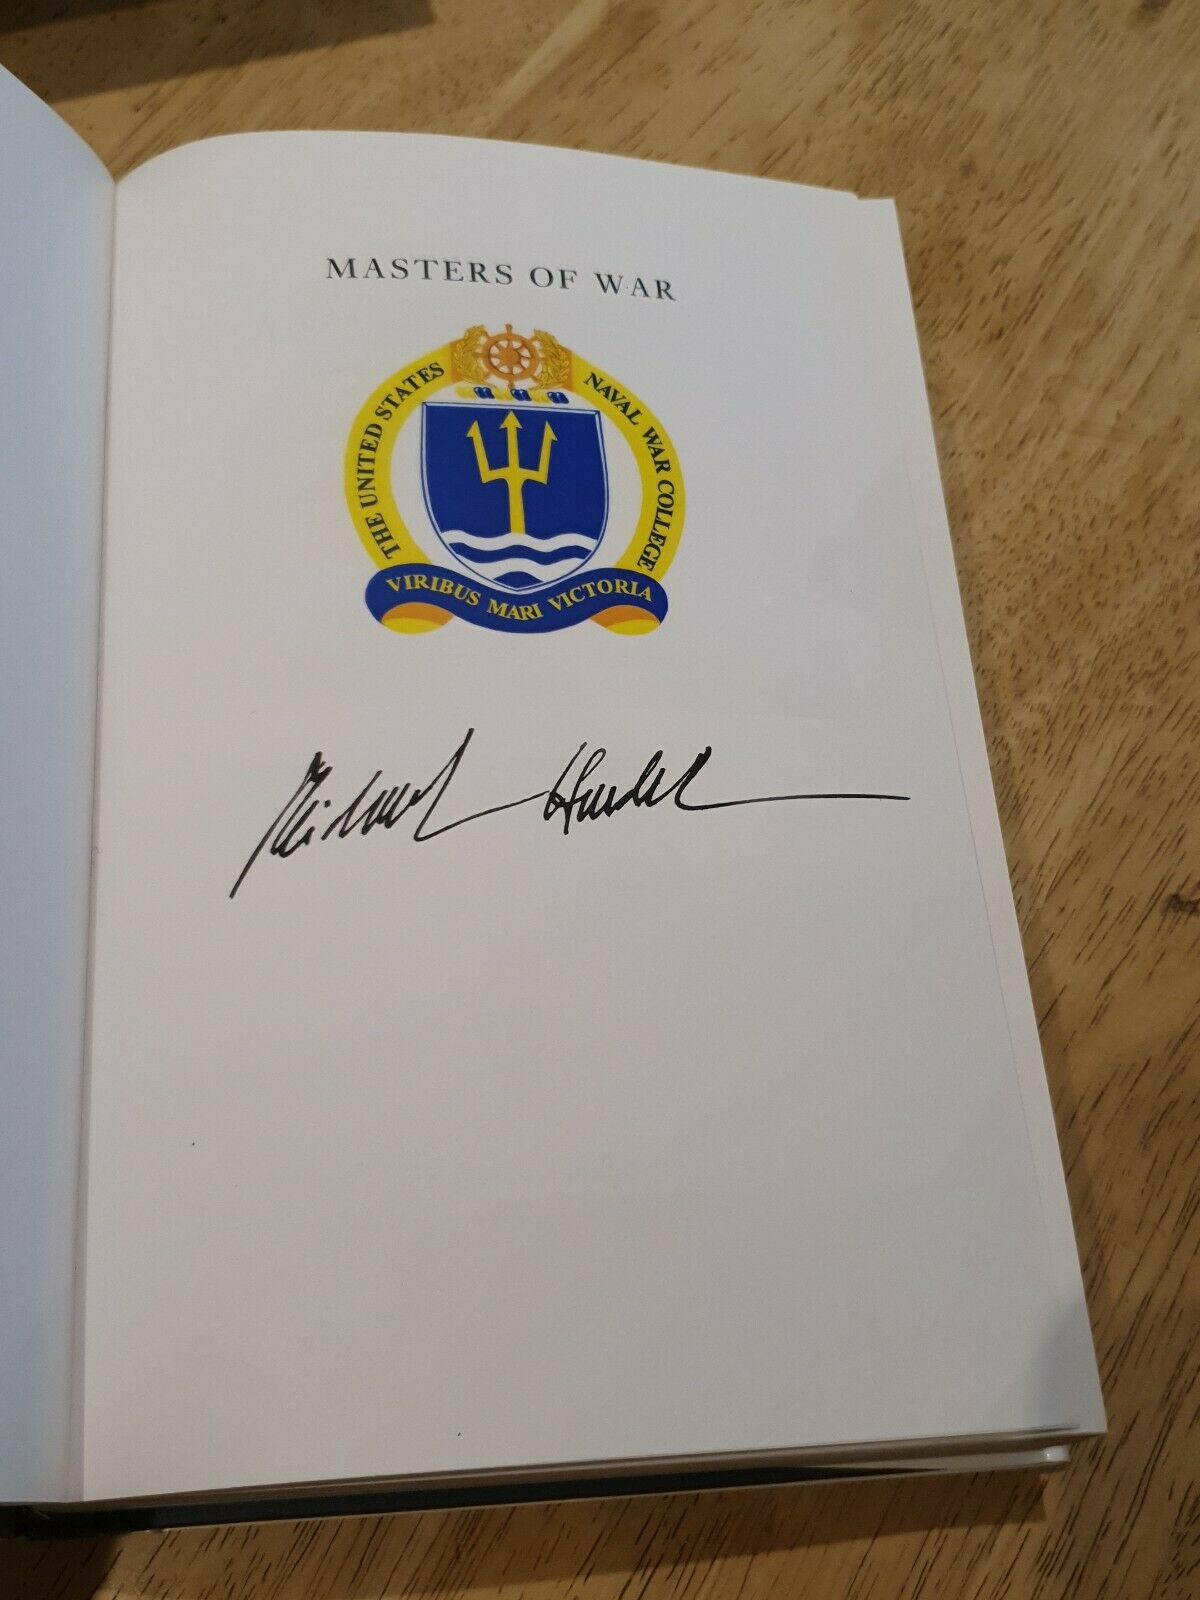 SIGNED -Masters of War by Michael I Handel